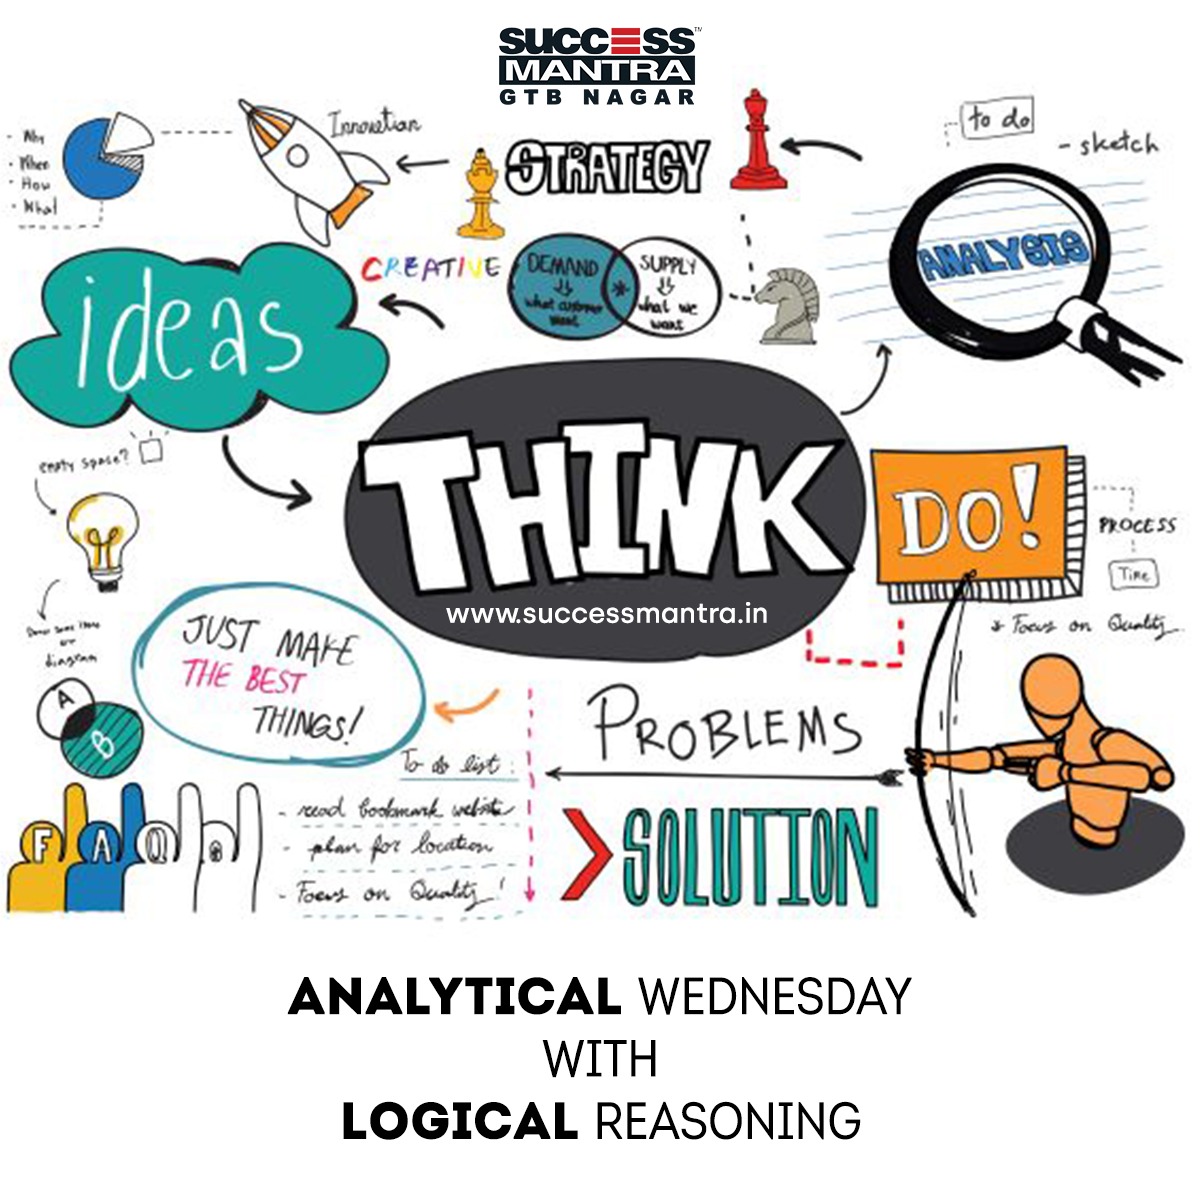 Questions on Logical Reasoning SMLRQ031